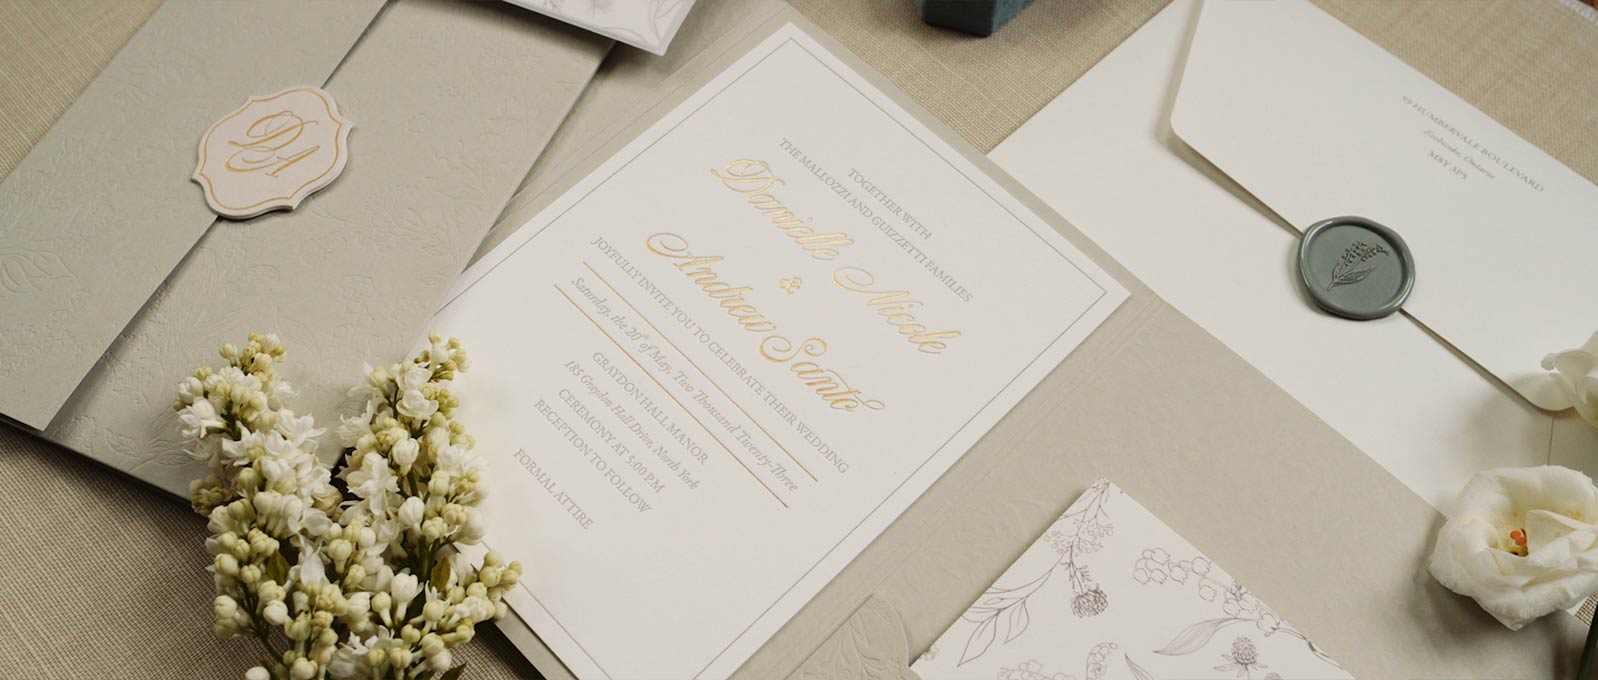 Wedding Invites and Stationery Details